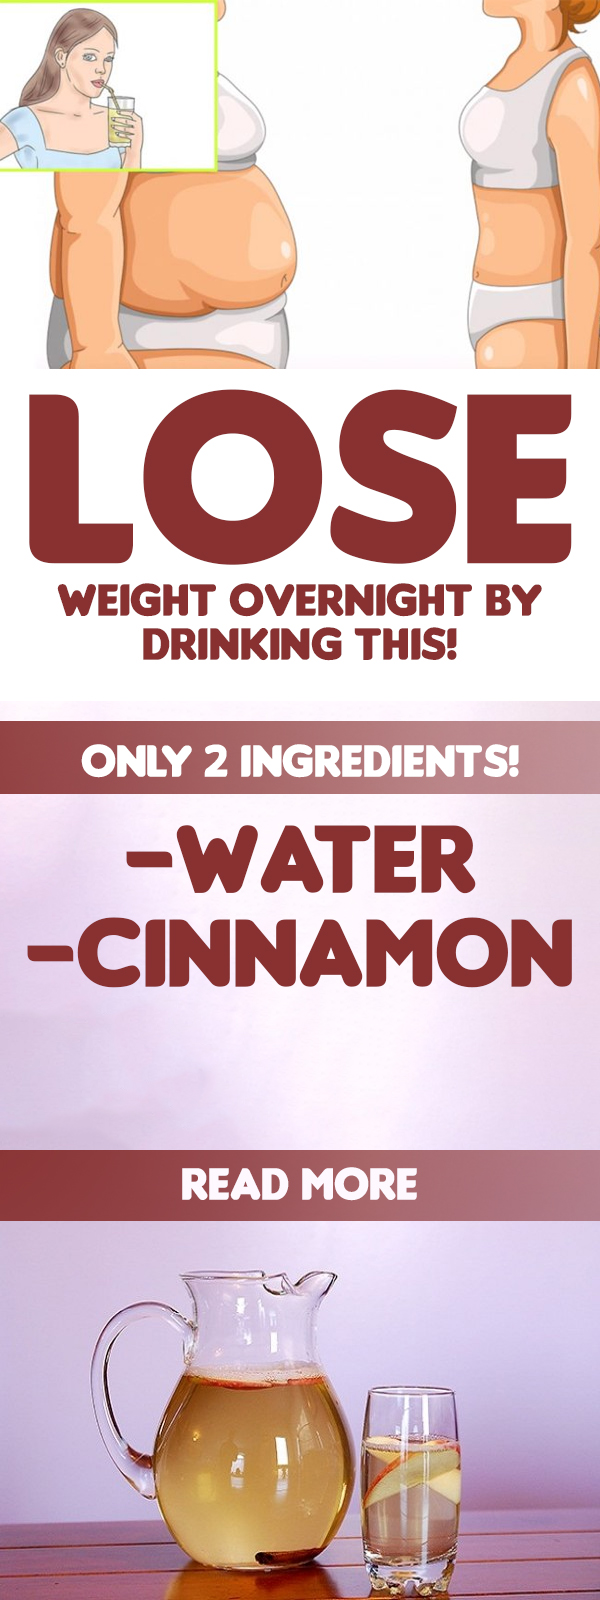 Lose Weight Overnight by Drinking This!